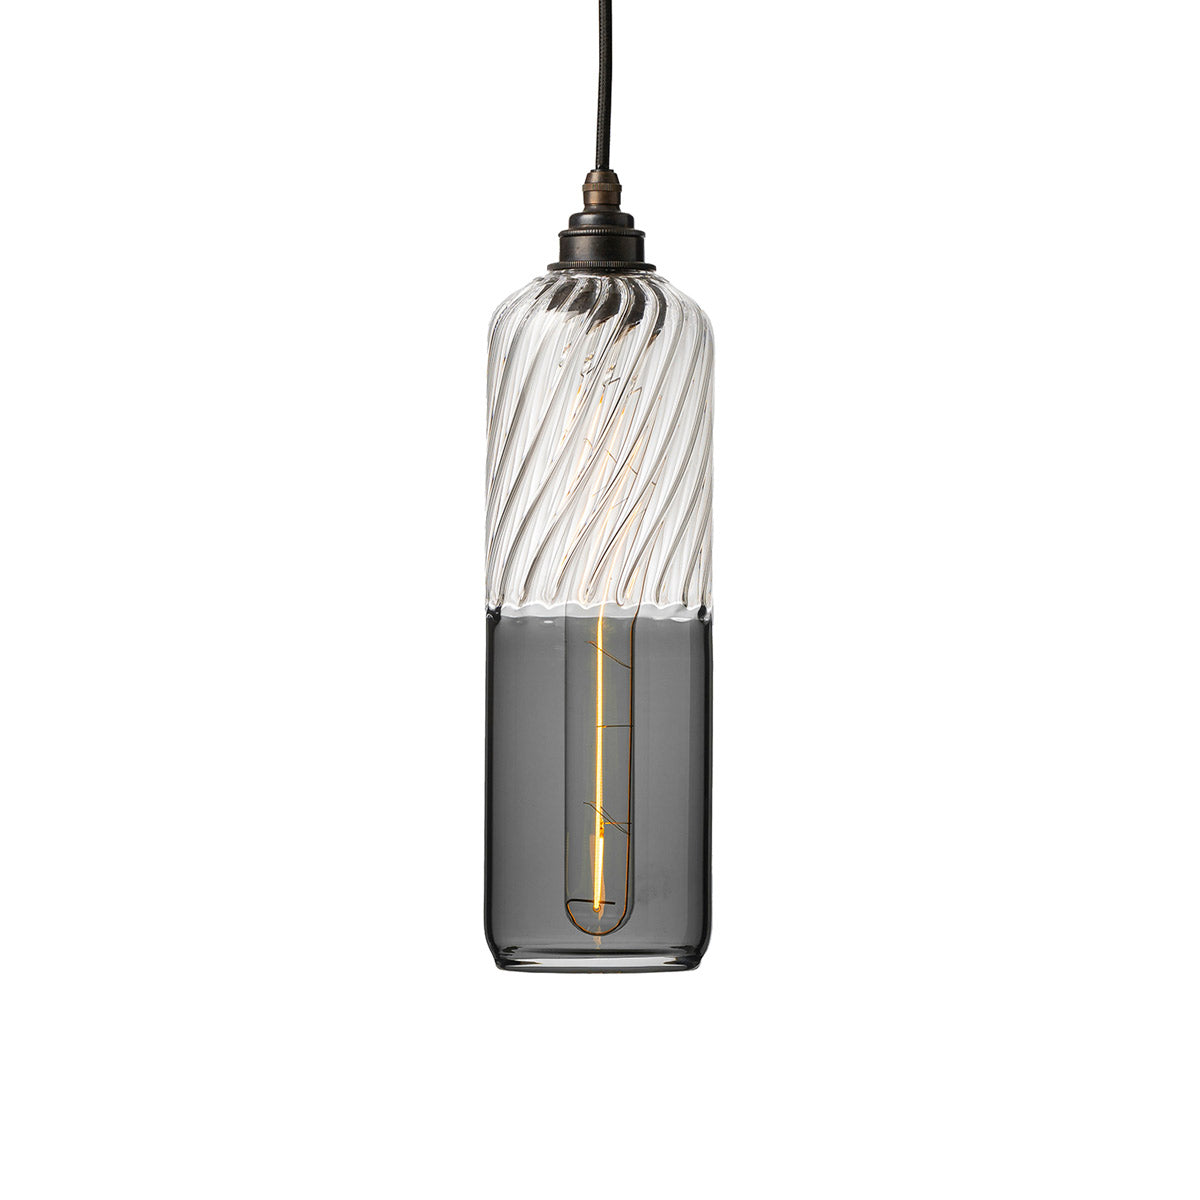 This Bickley coloured glass pendant light features ribbed twist glass at the top and transparent black glass on the bottom.